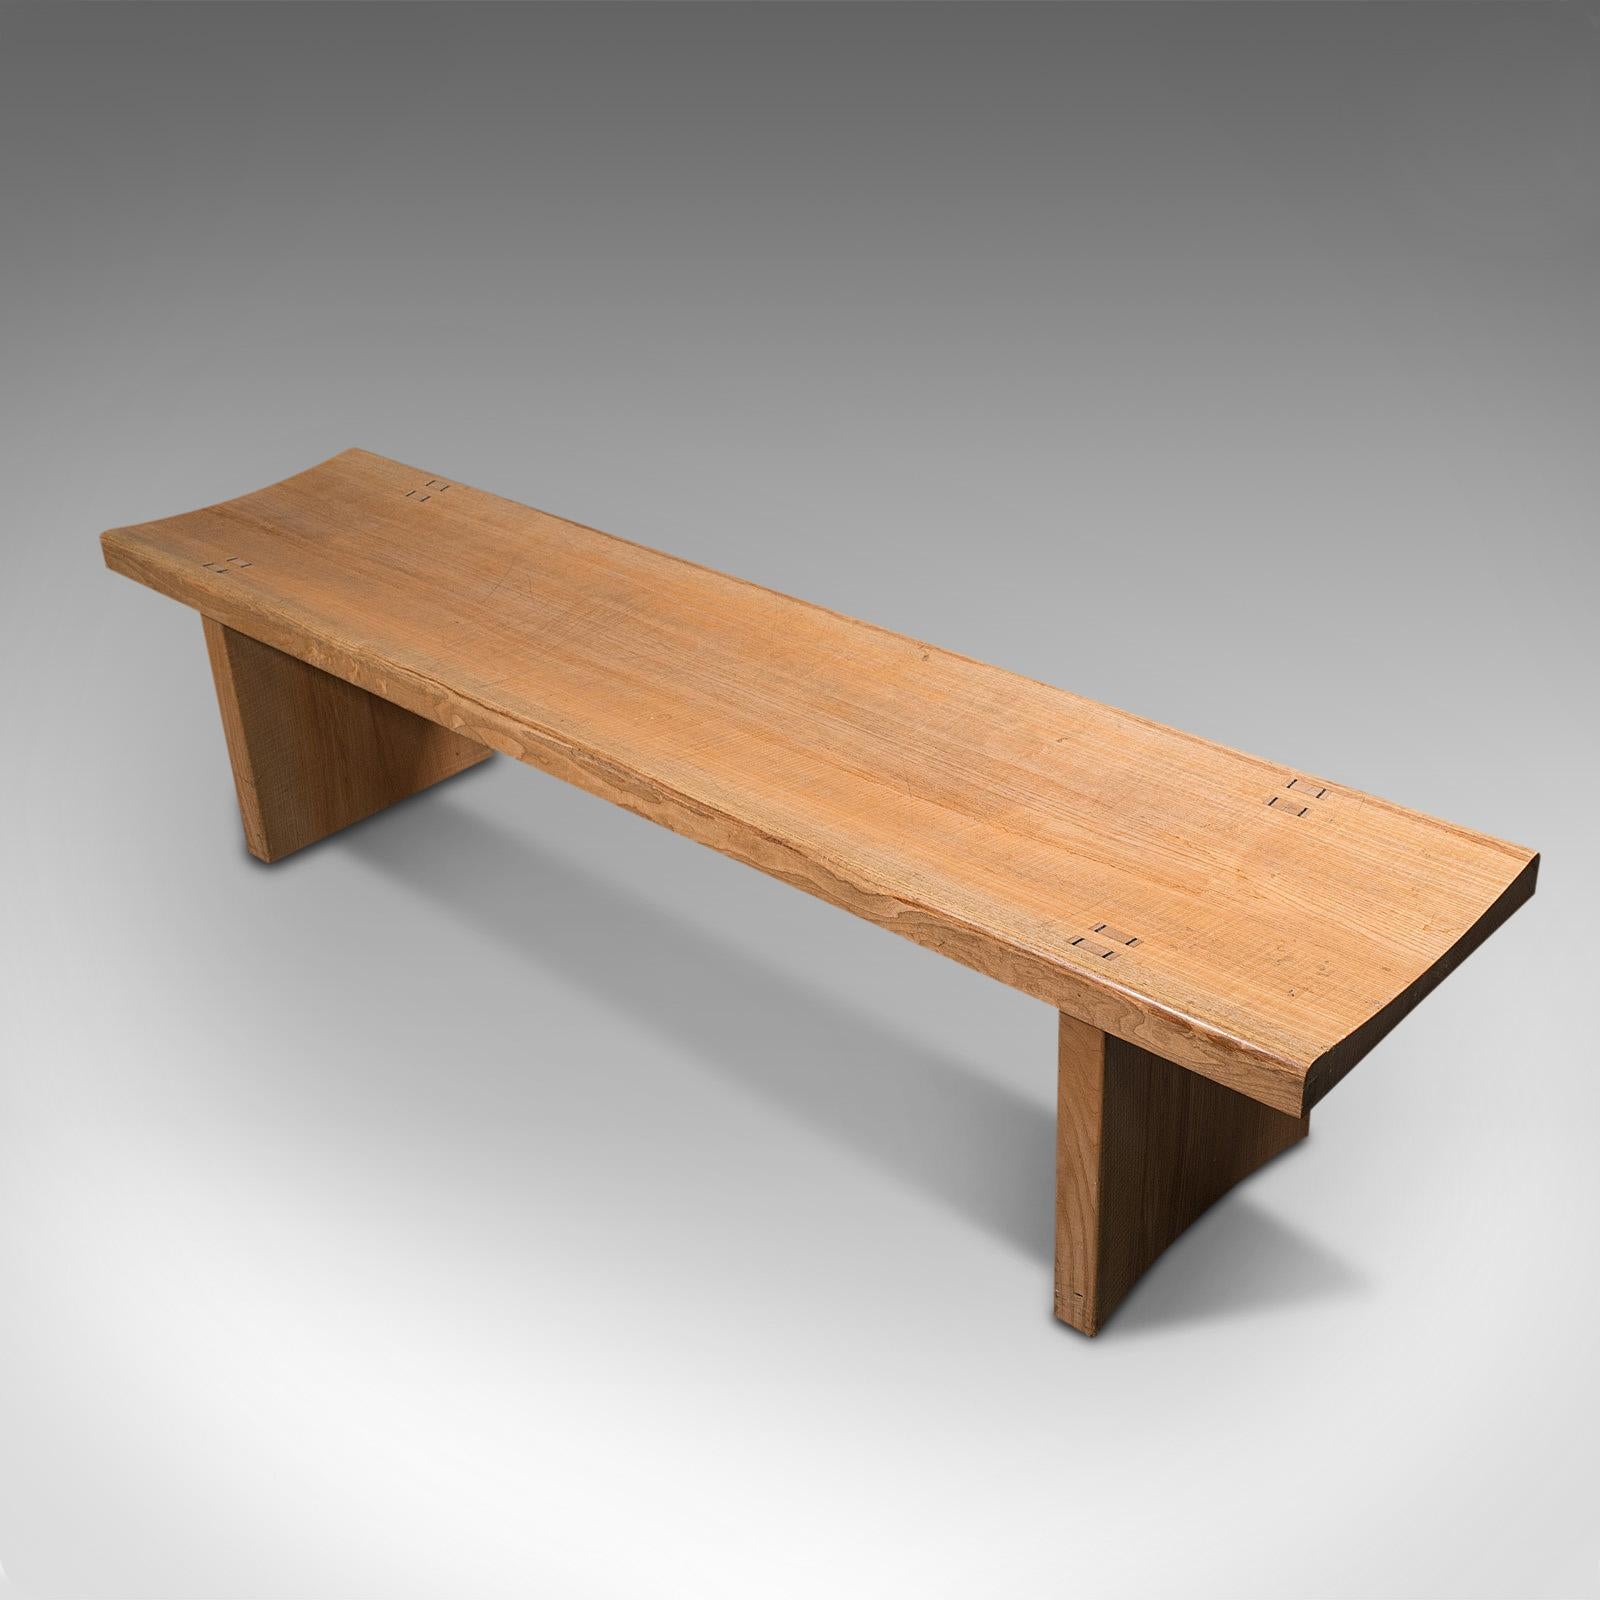 20th Century Pair of Vintage Museum Benches, English, Oak, Dining, Kitchen, Pew, Circa 1980